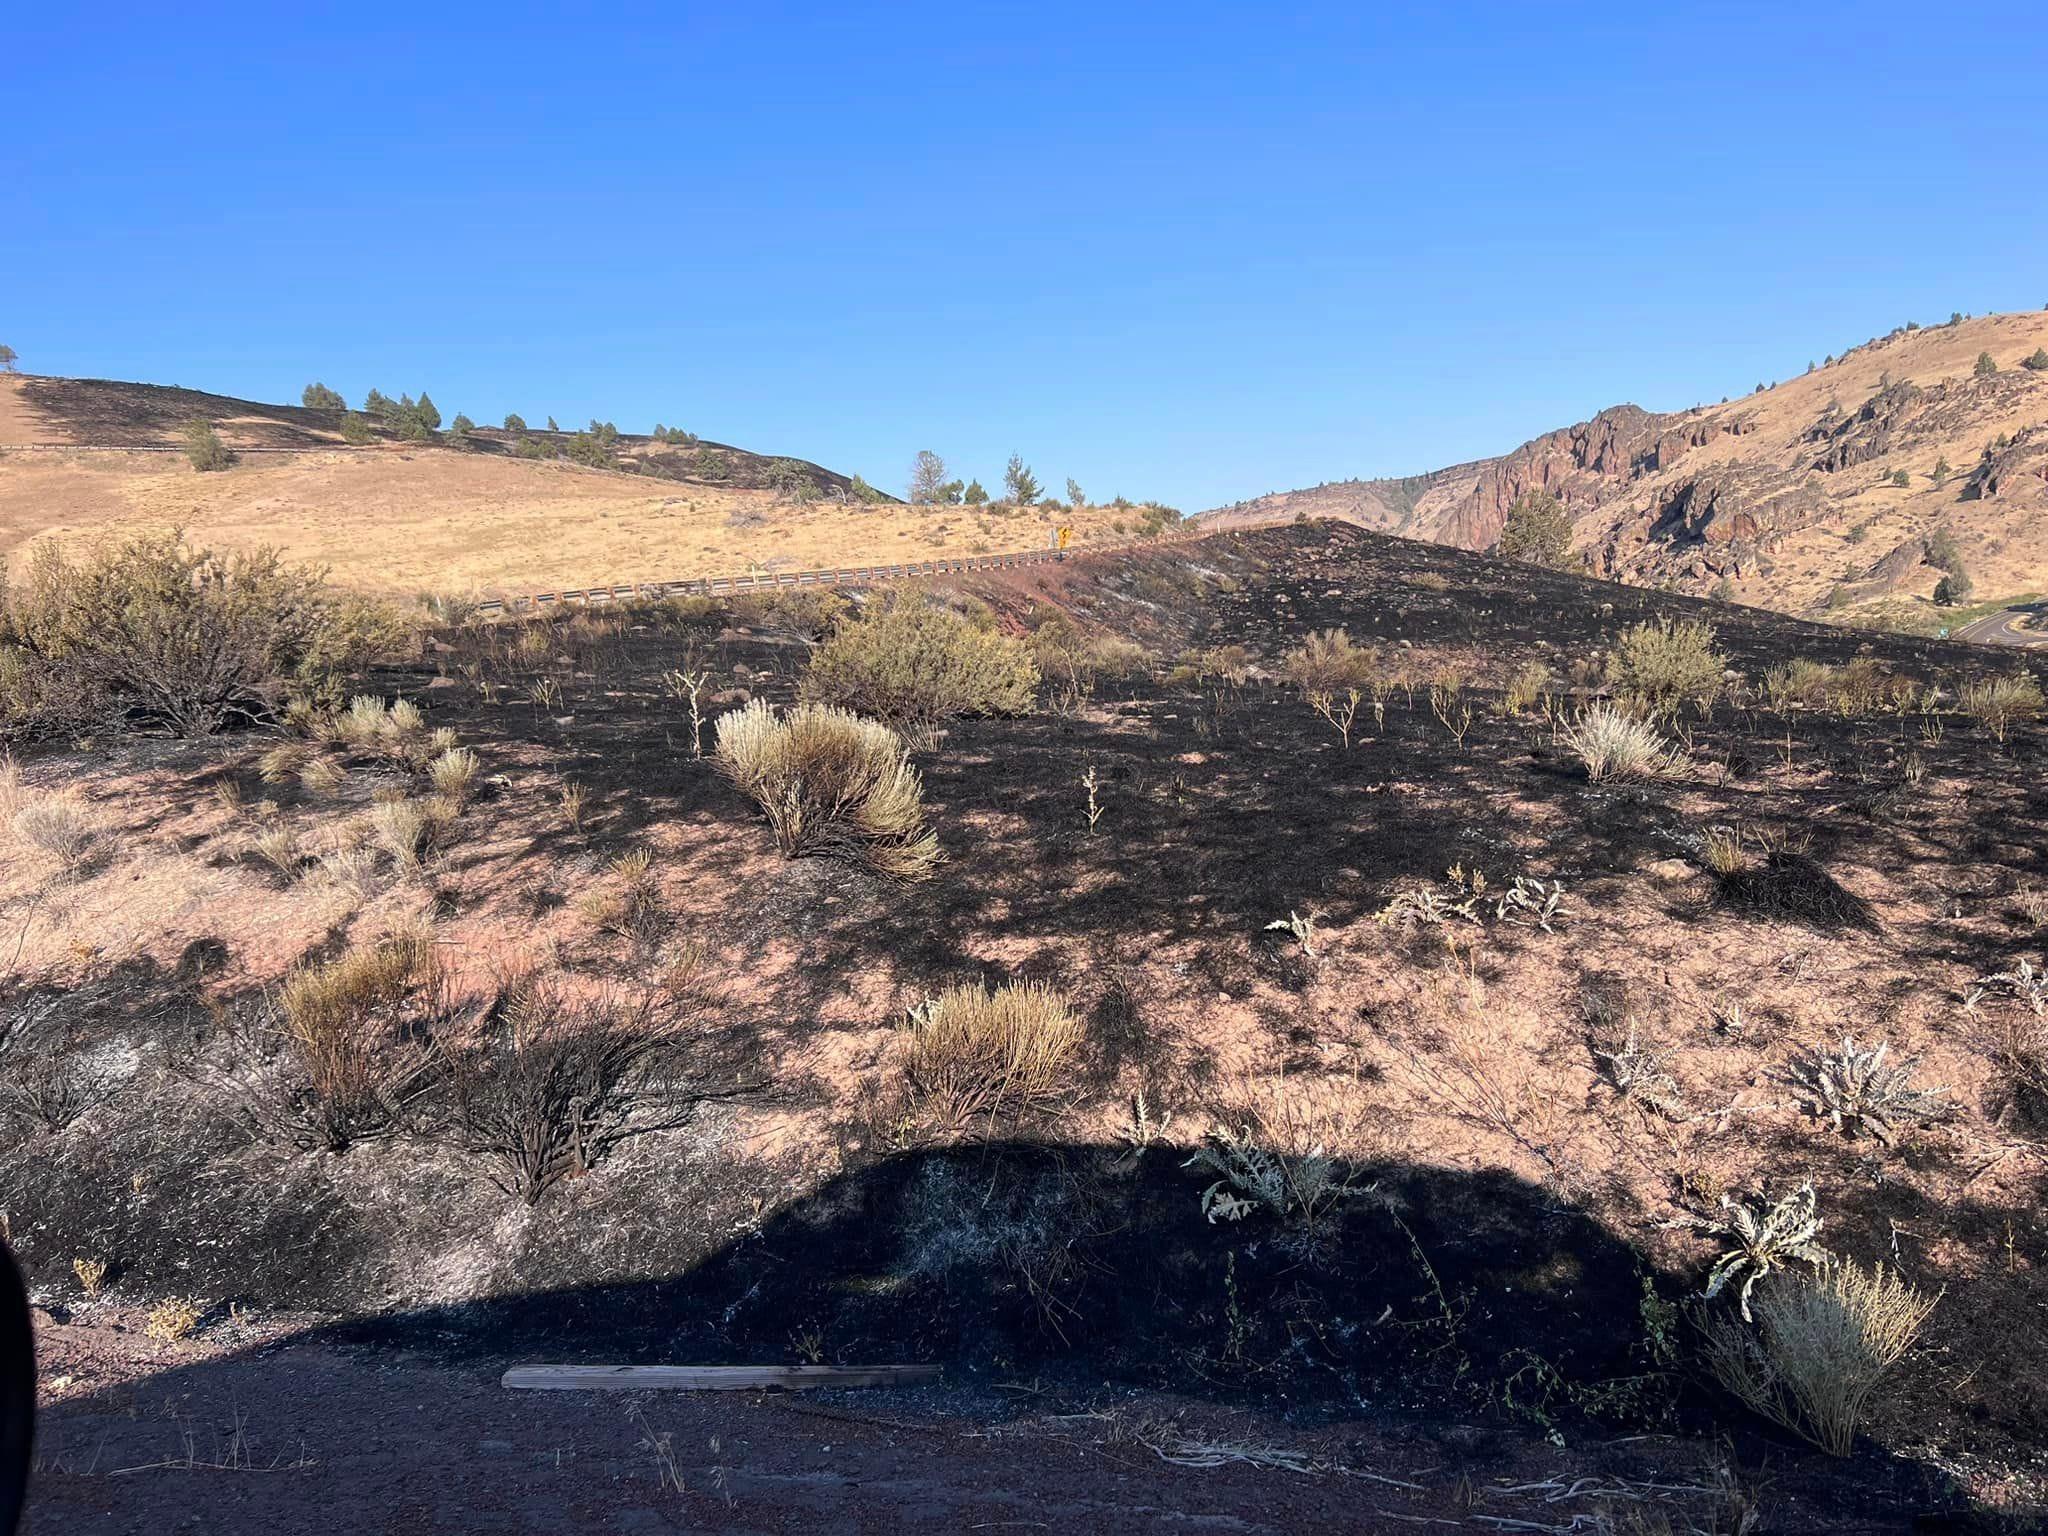 The 300-acre Grade Fire was reported Monday night.